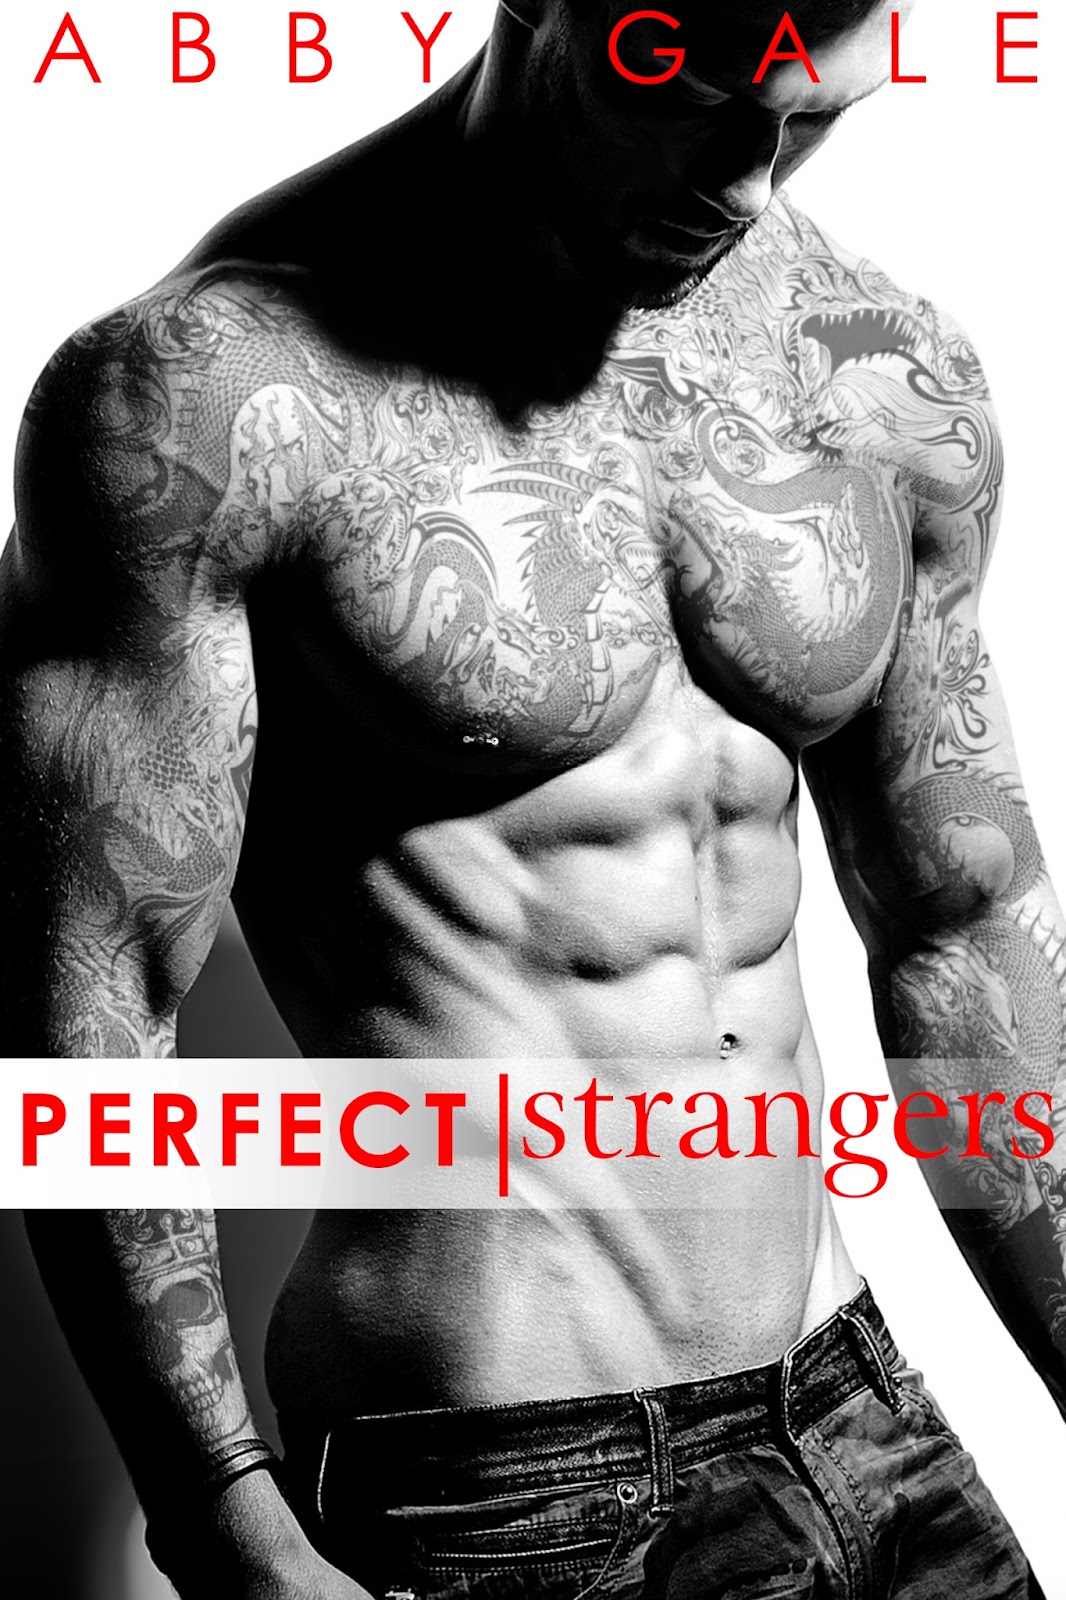 Perfect Stranger Abby Gale Ecover.jpg